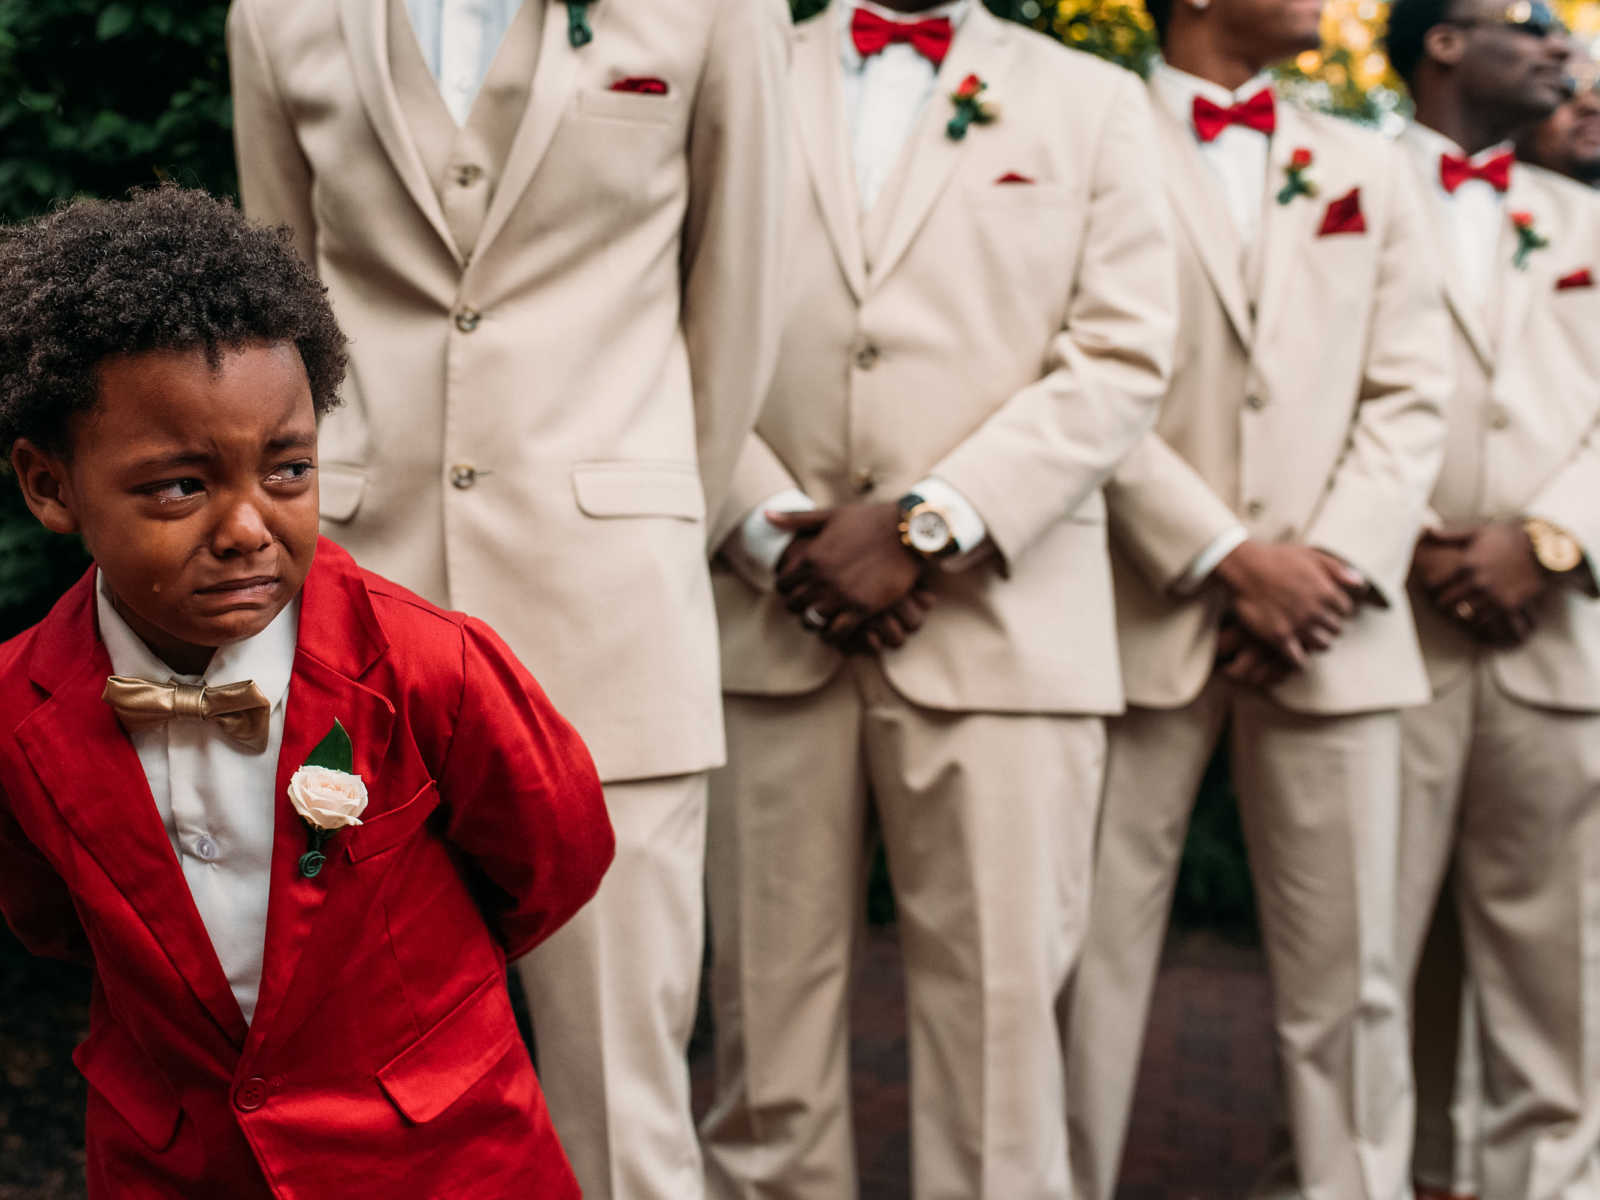 Little boy in red suit stands in front of groomsmen crying as his mother walks down the aisle